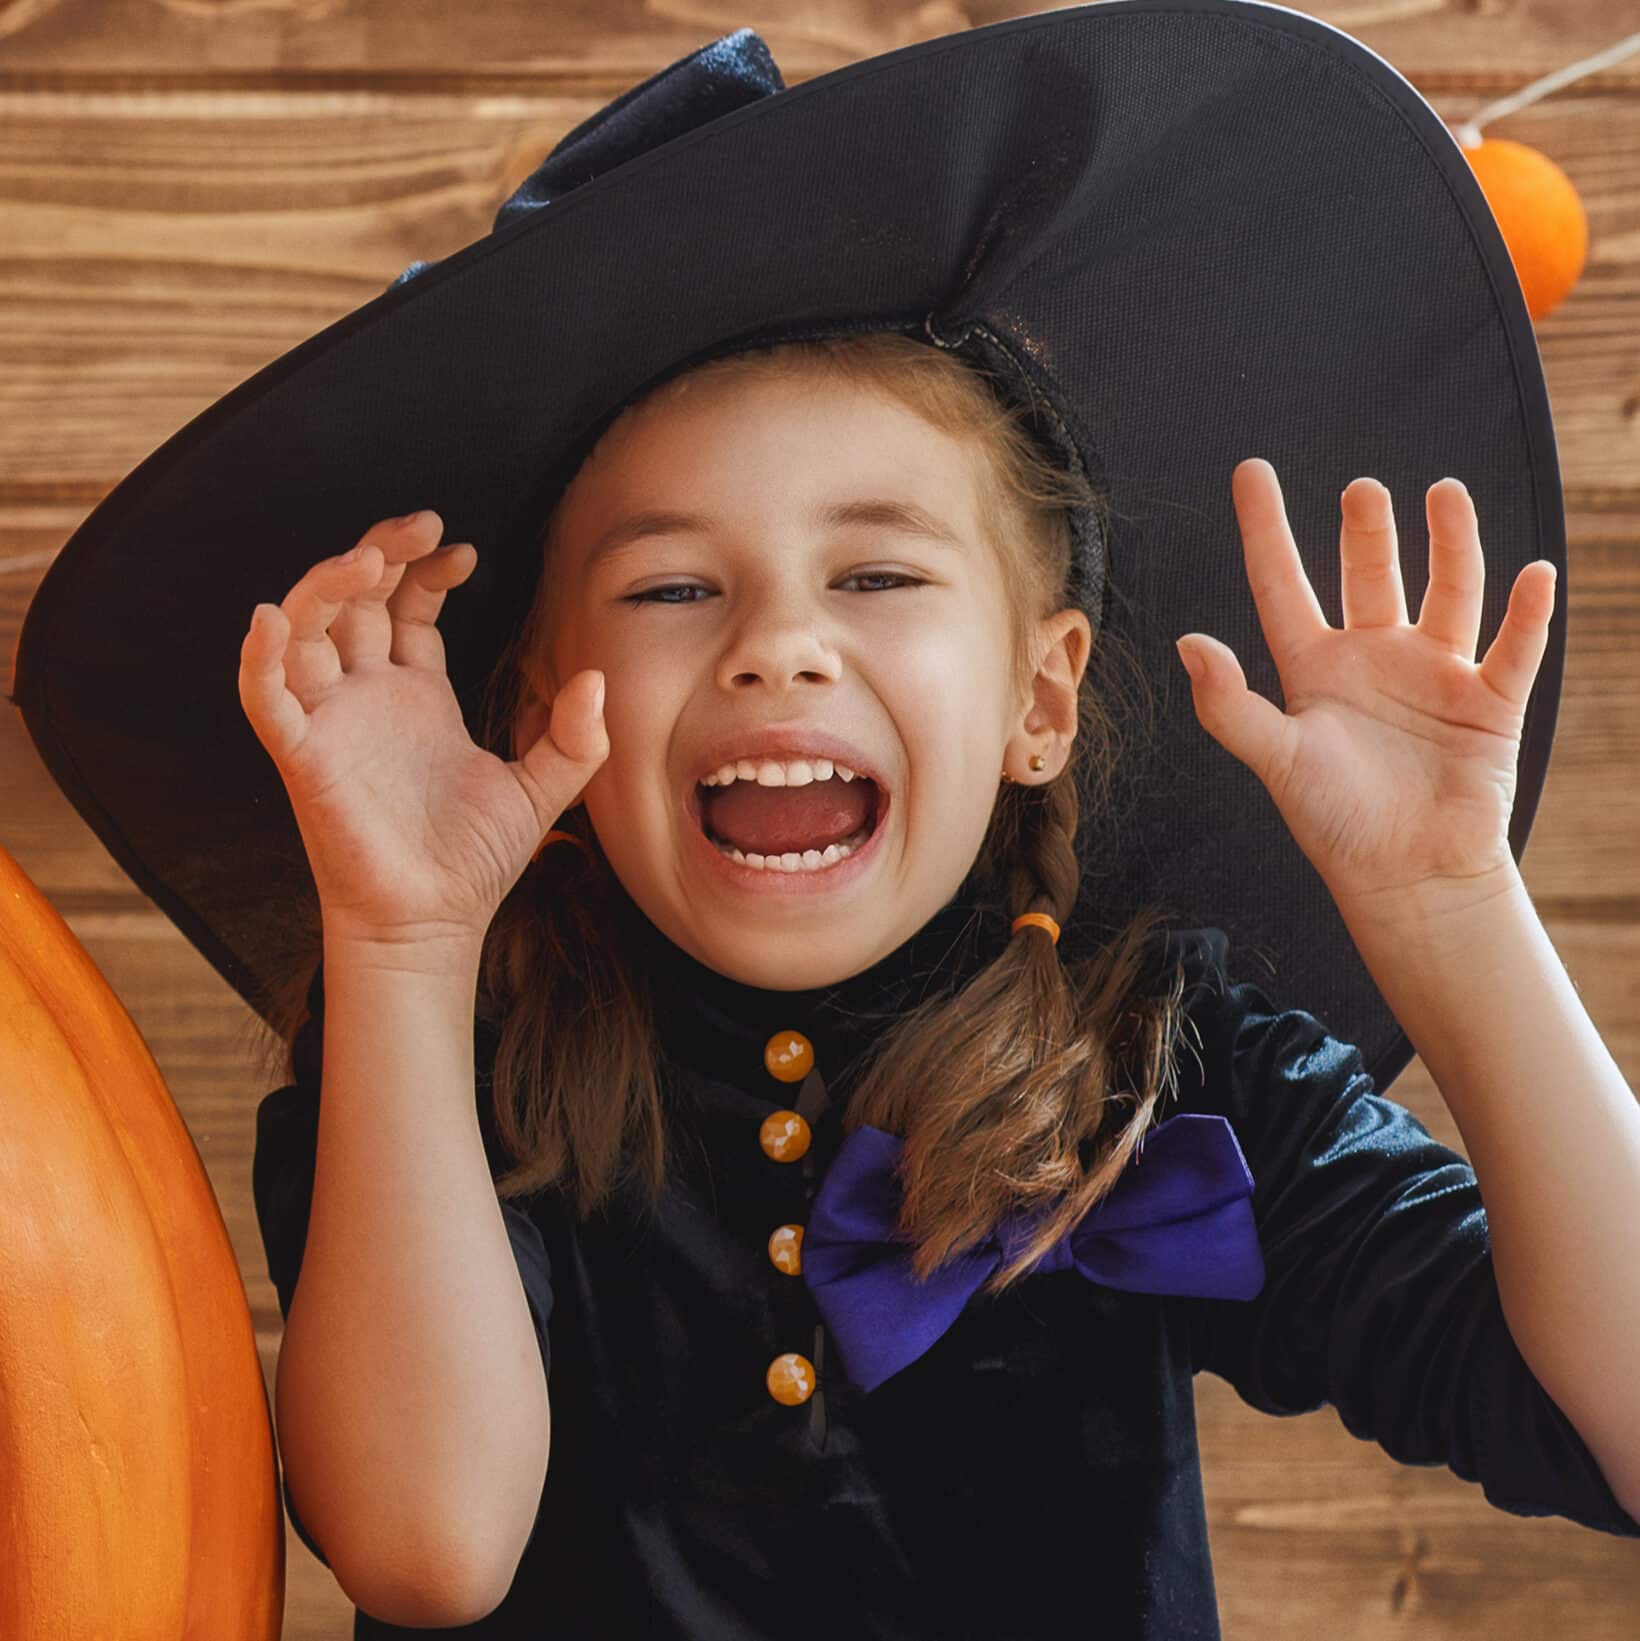 5 Scary Facts About Teeth For Halloween